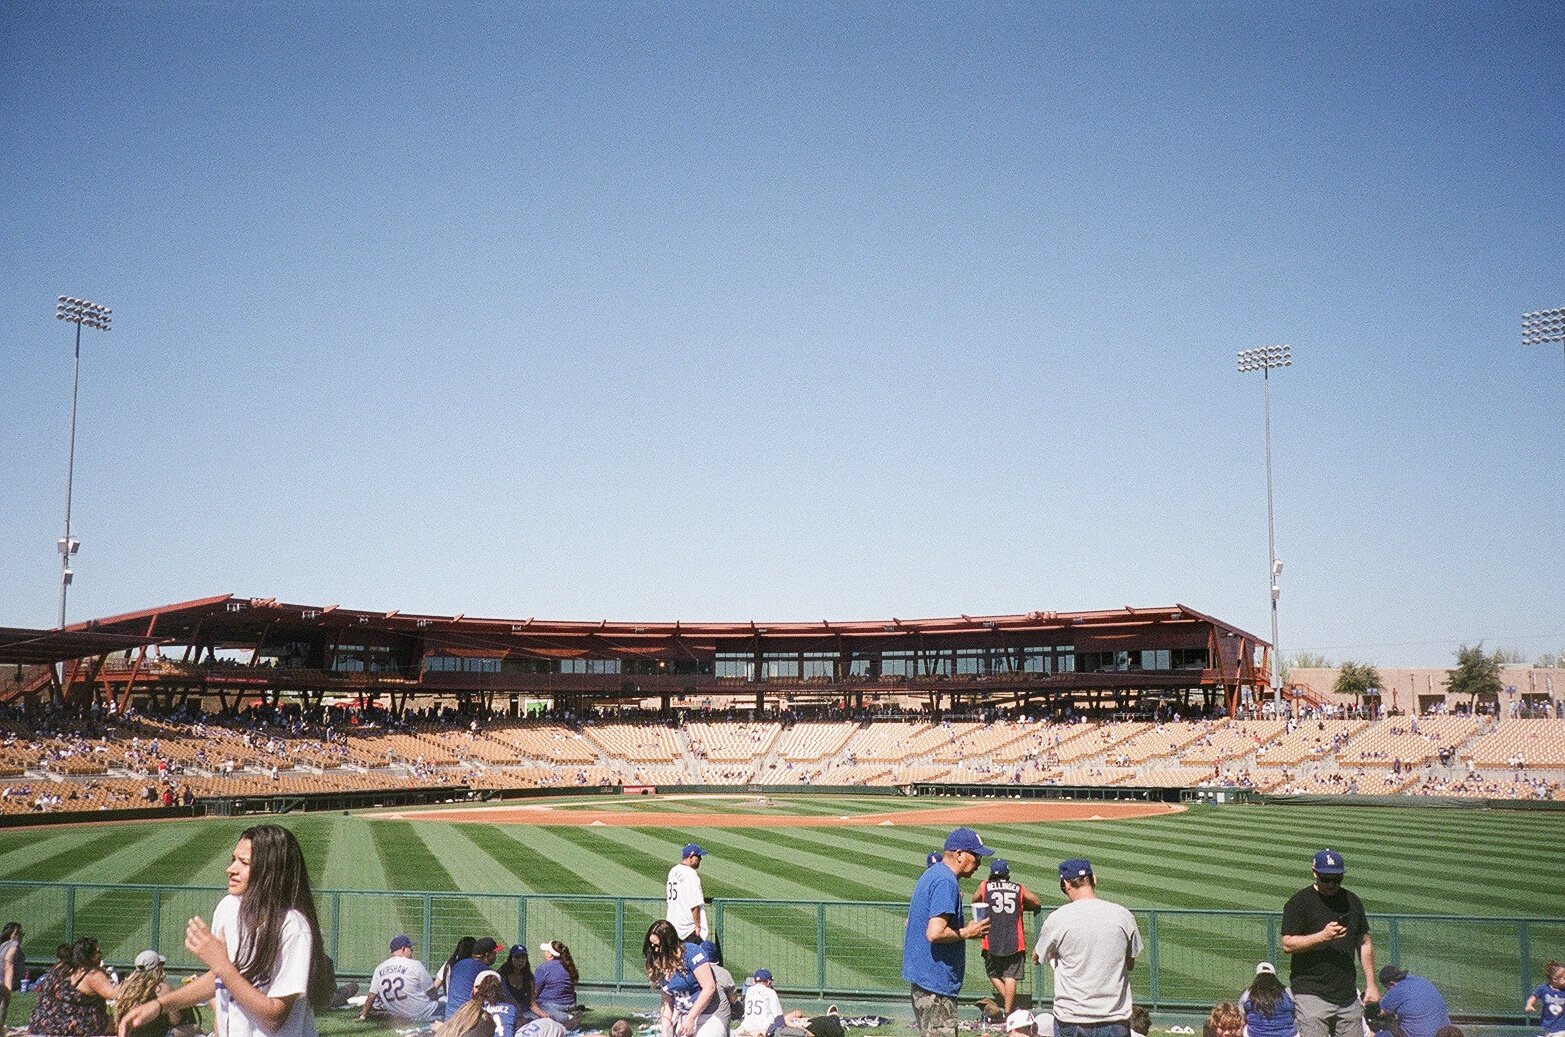 A baseball field is seen with fans in the stands.